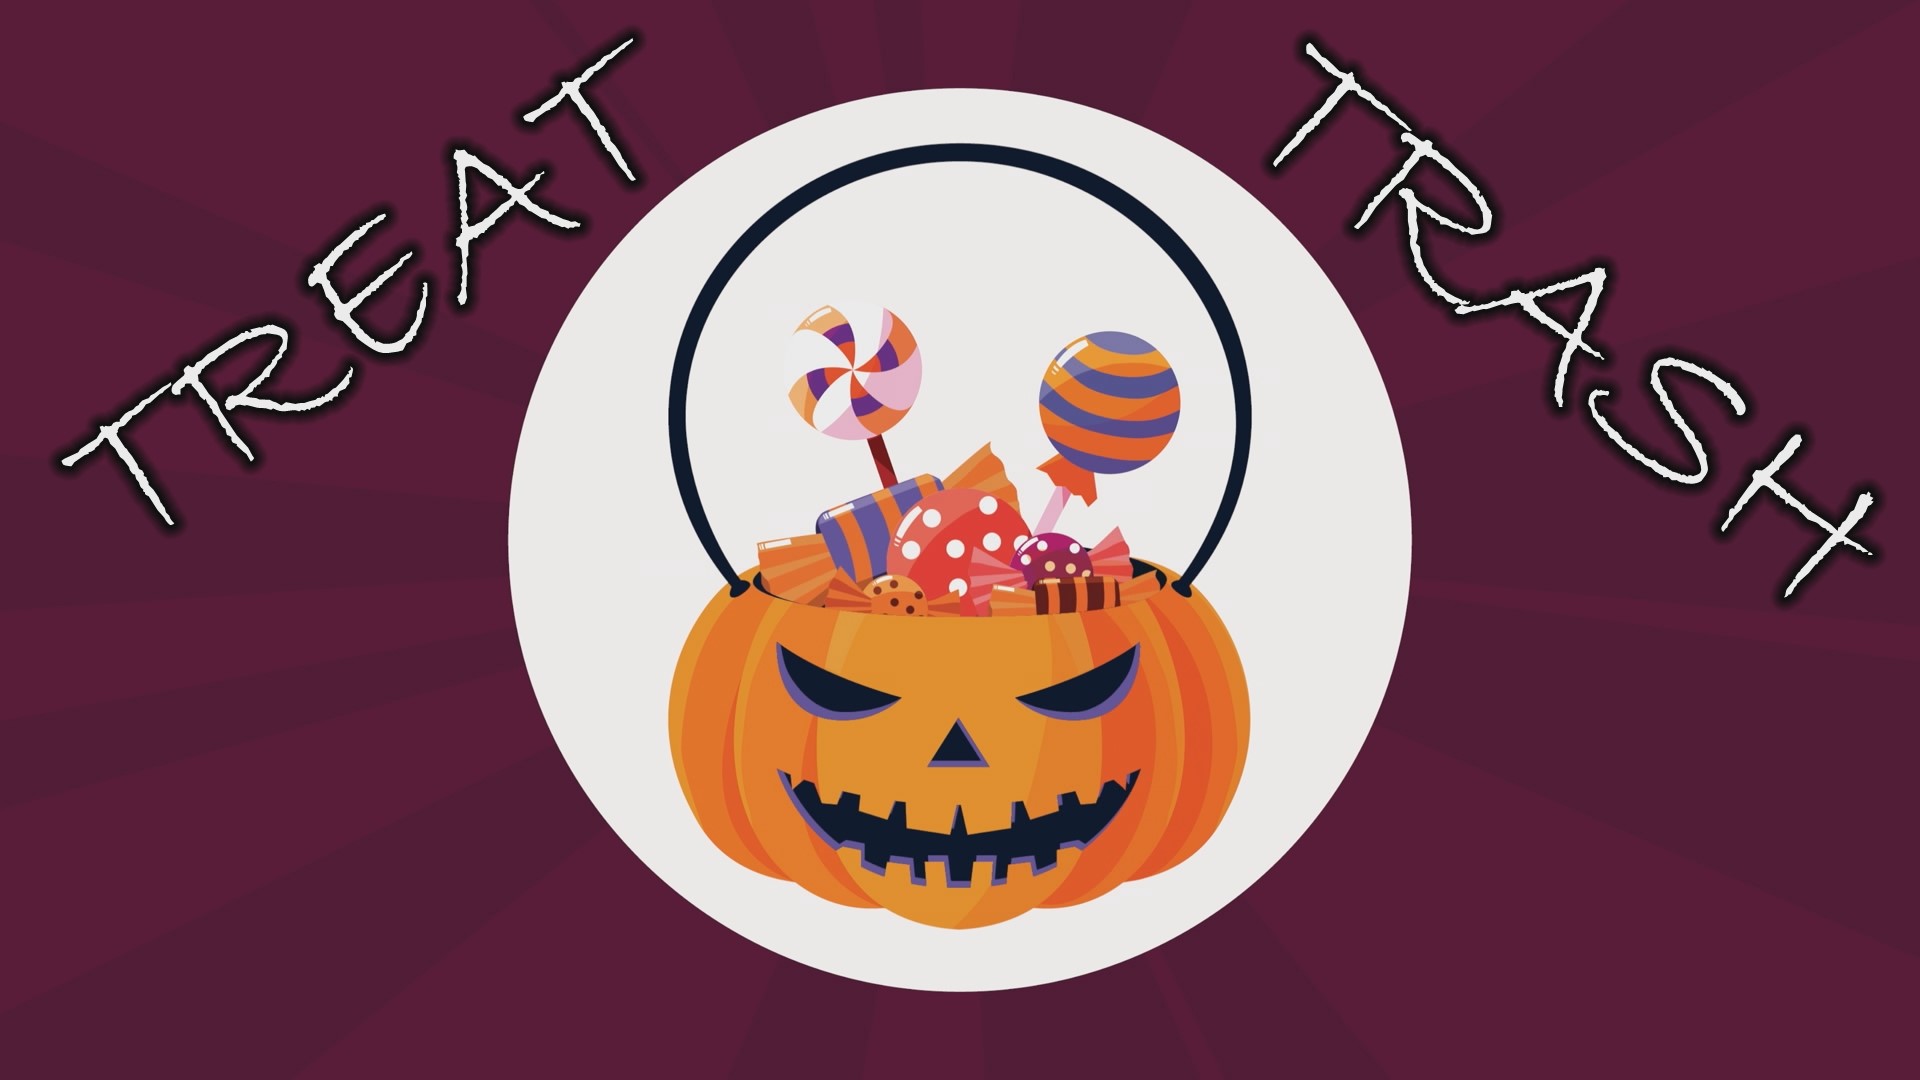 13 ON YOUR SIDE's Riley Mack, Alana Holland and Steven Bohner share the best and worst Halloween candies in a special called "Treat or Trash".